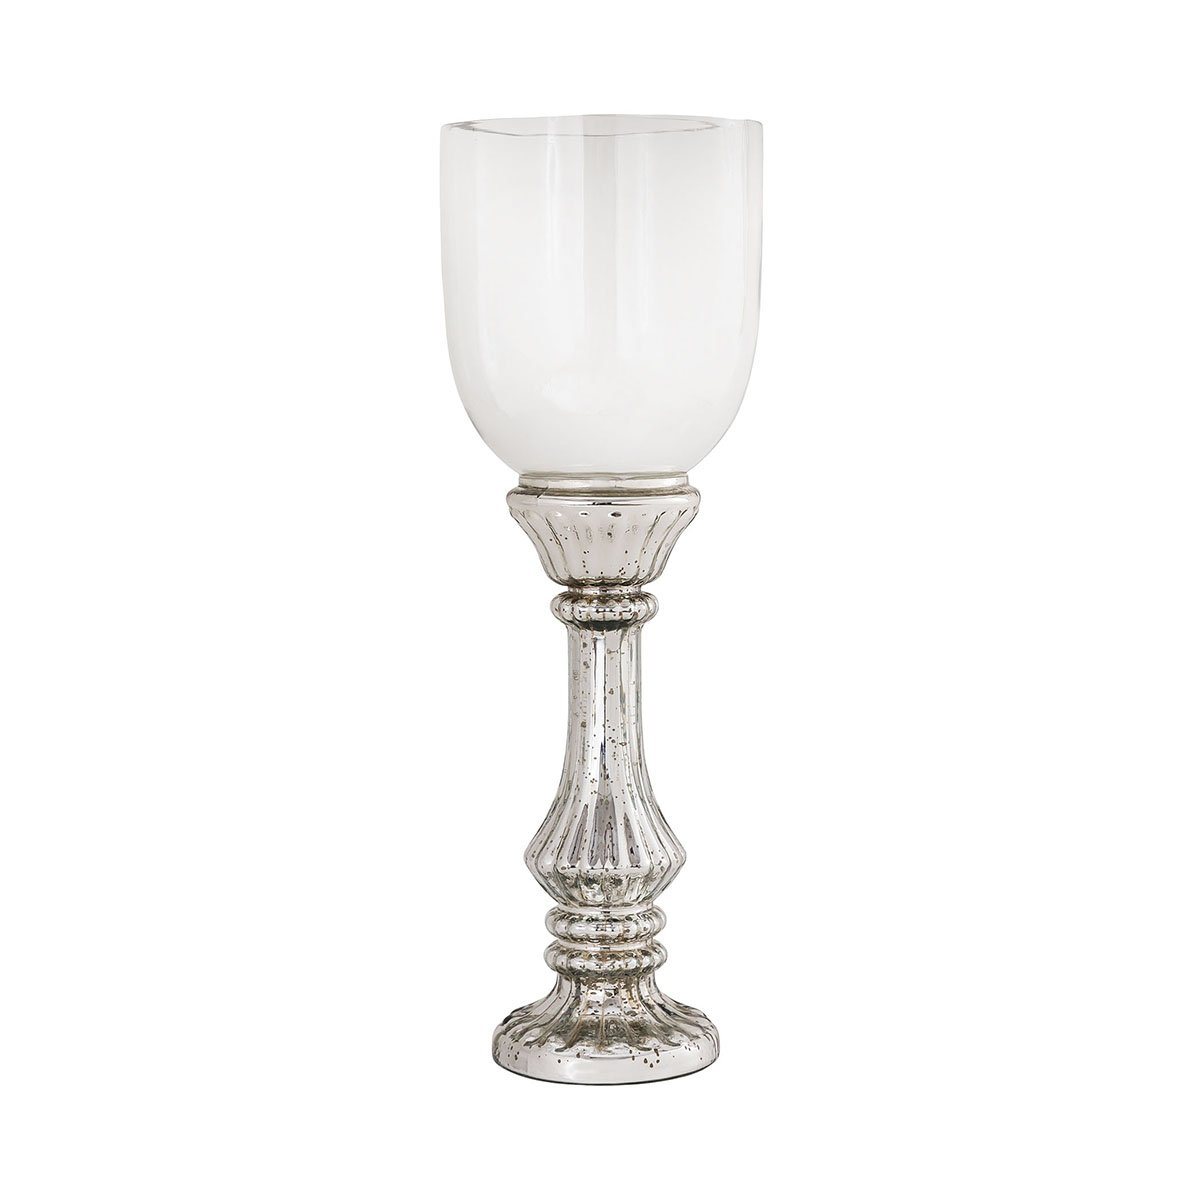 Casandra Candle Holder Accessories Pomeroy 